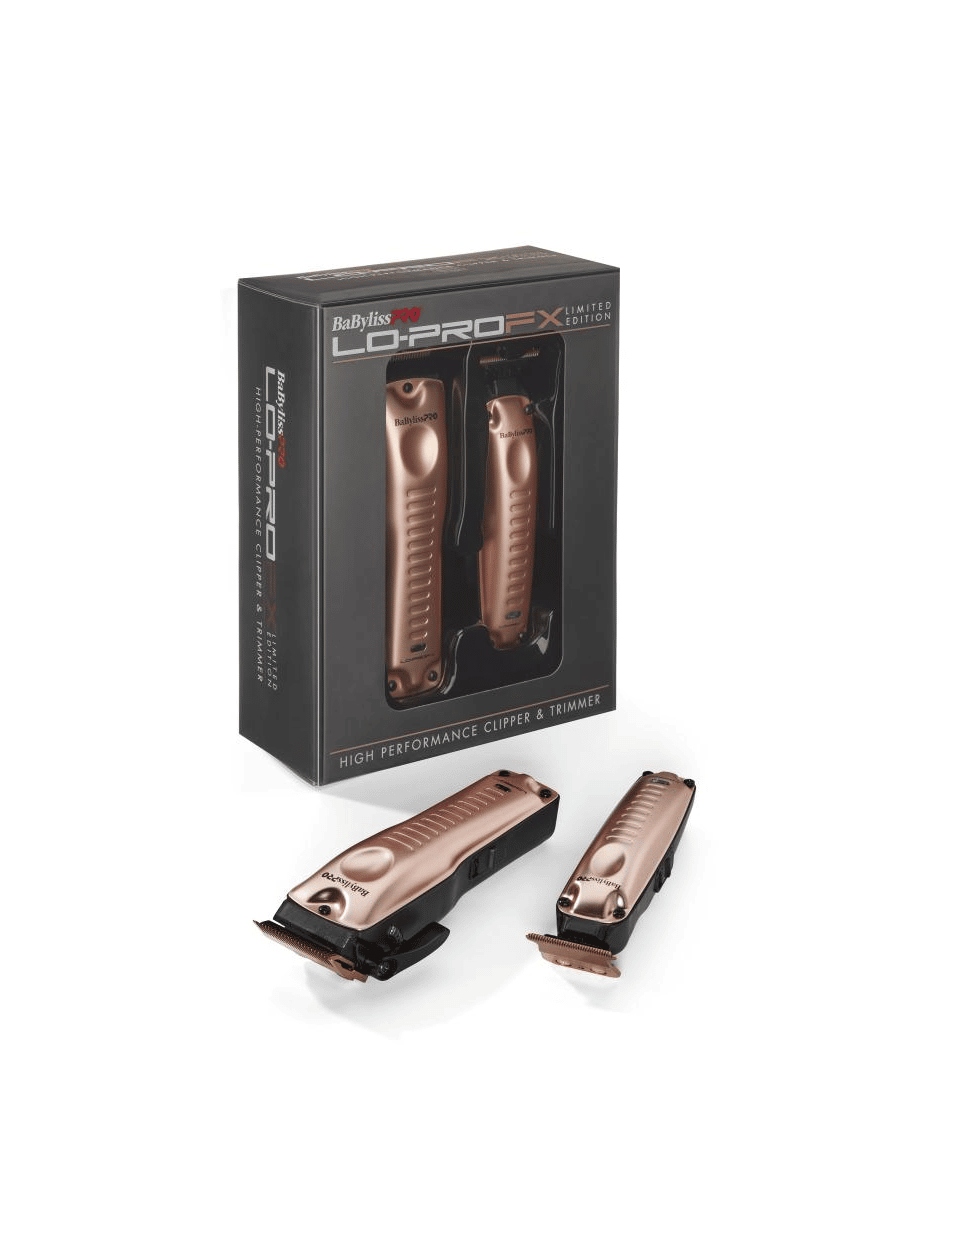 BabylissPro Lo-ProFX Limited collection Rose Gold package